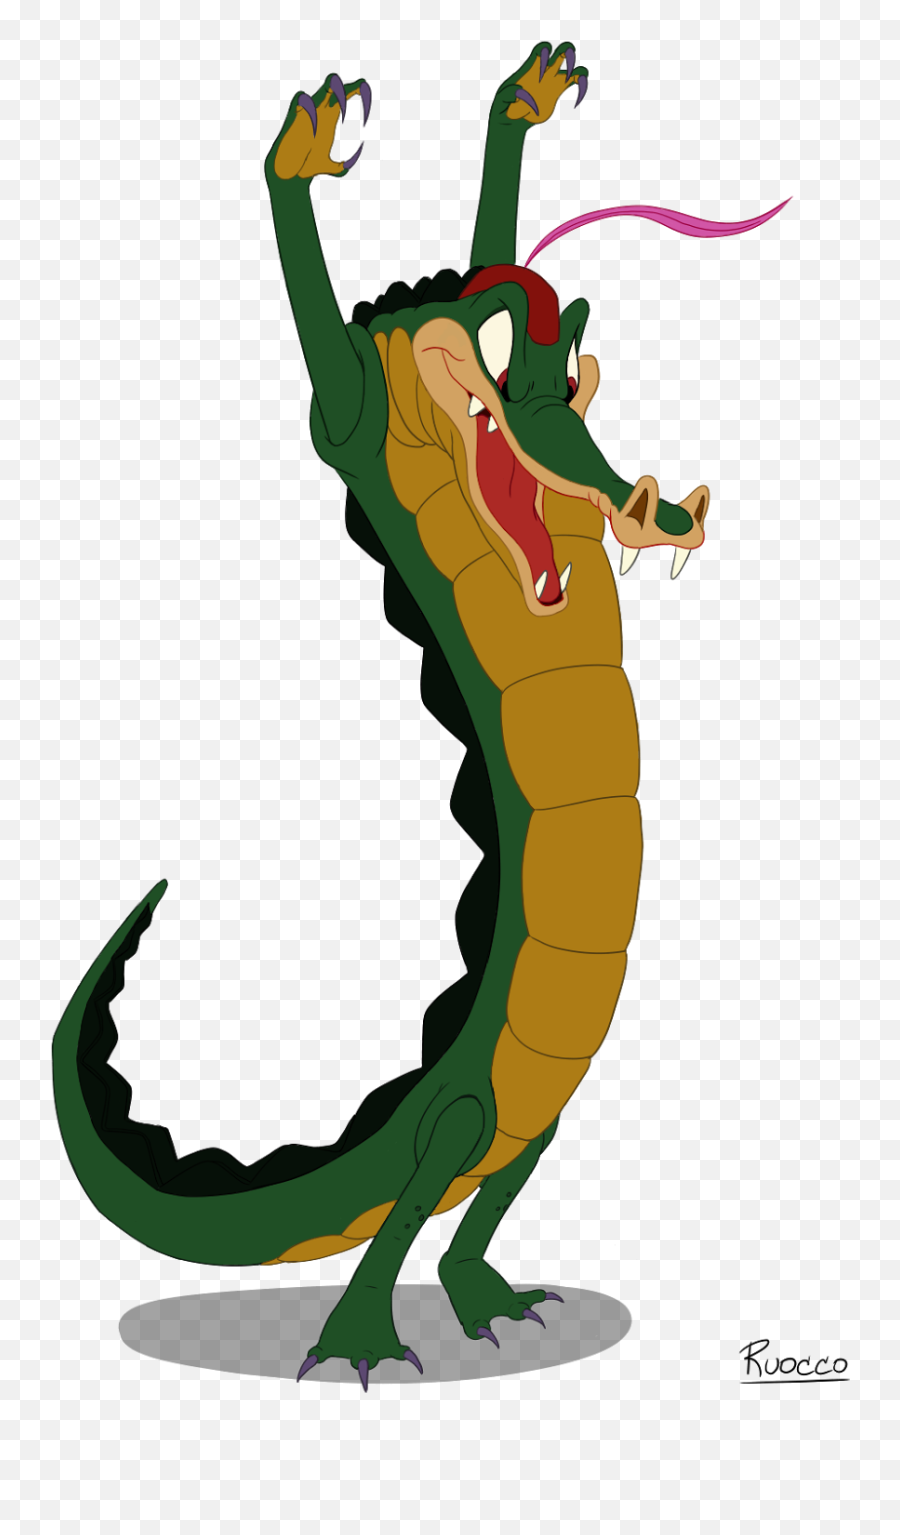 Ben Ali Is A Character From The - Ben Ali Gator Png Clipart Alligator Fantasia,Gator Png